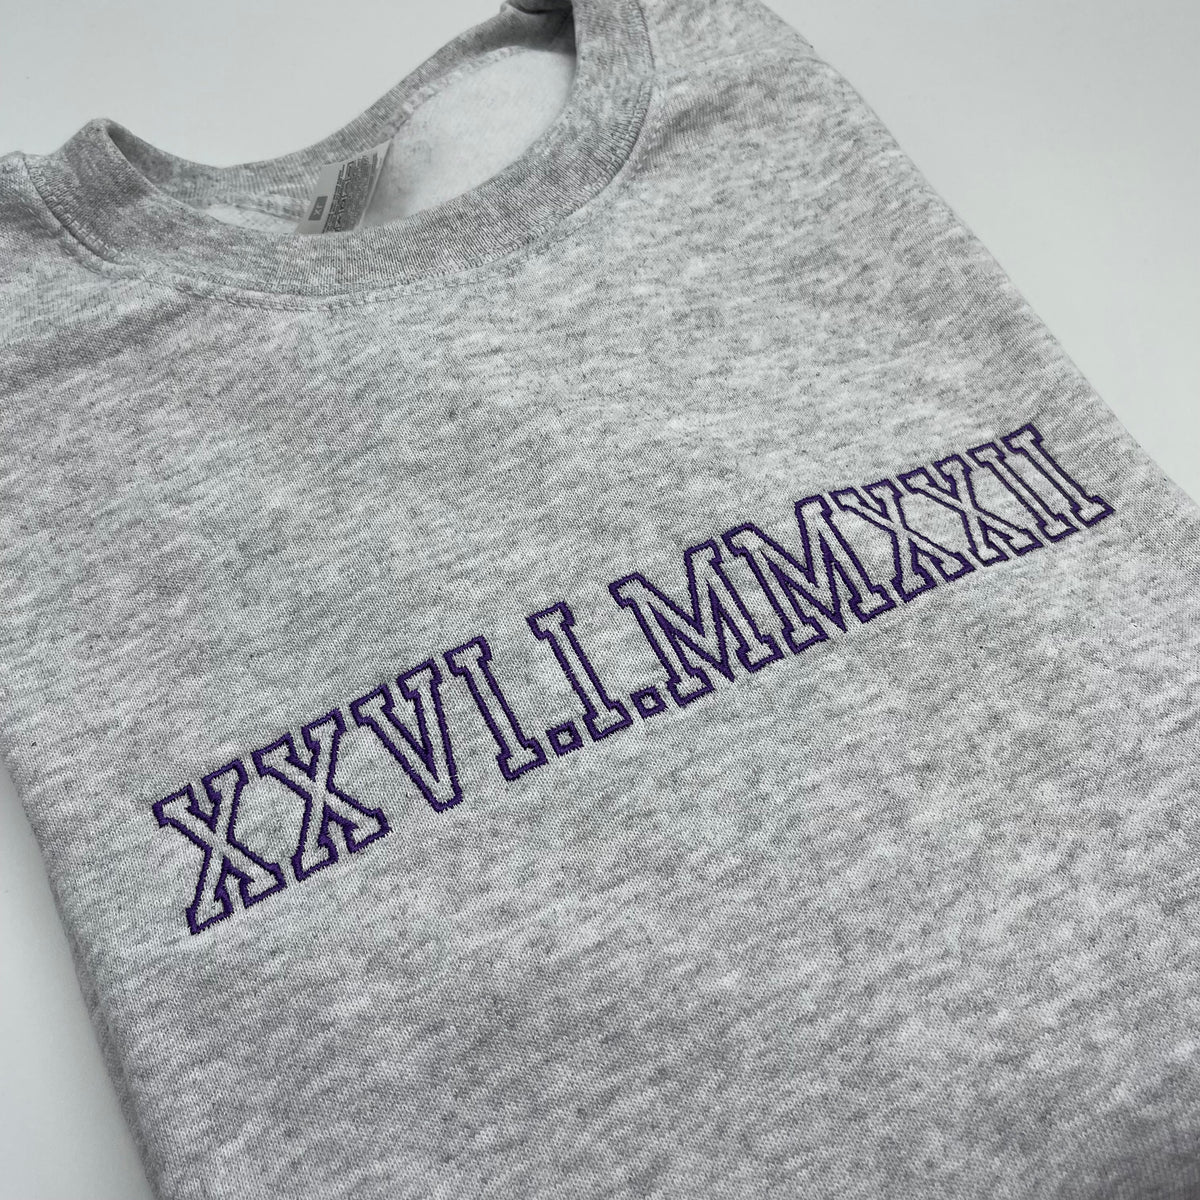 College Font Personalised Roman Numerals Sweatshirt. personalised gifts for couples, • wedding anniversary gifts, personalised gifts for boyfriend